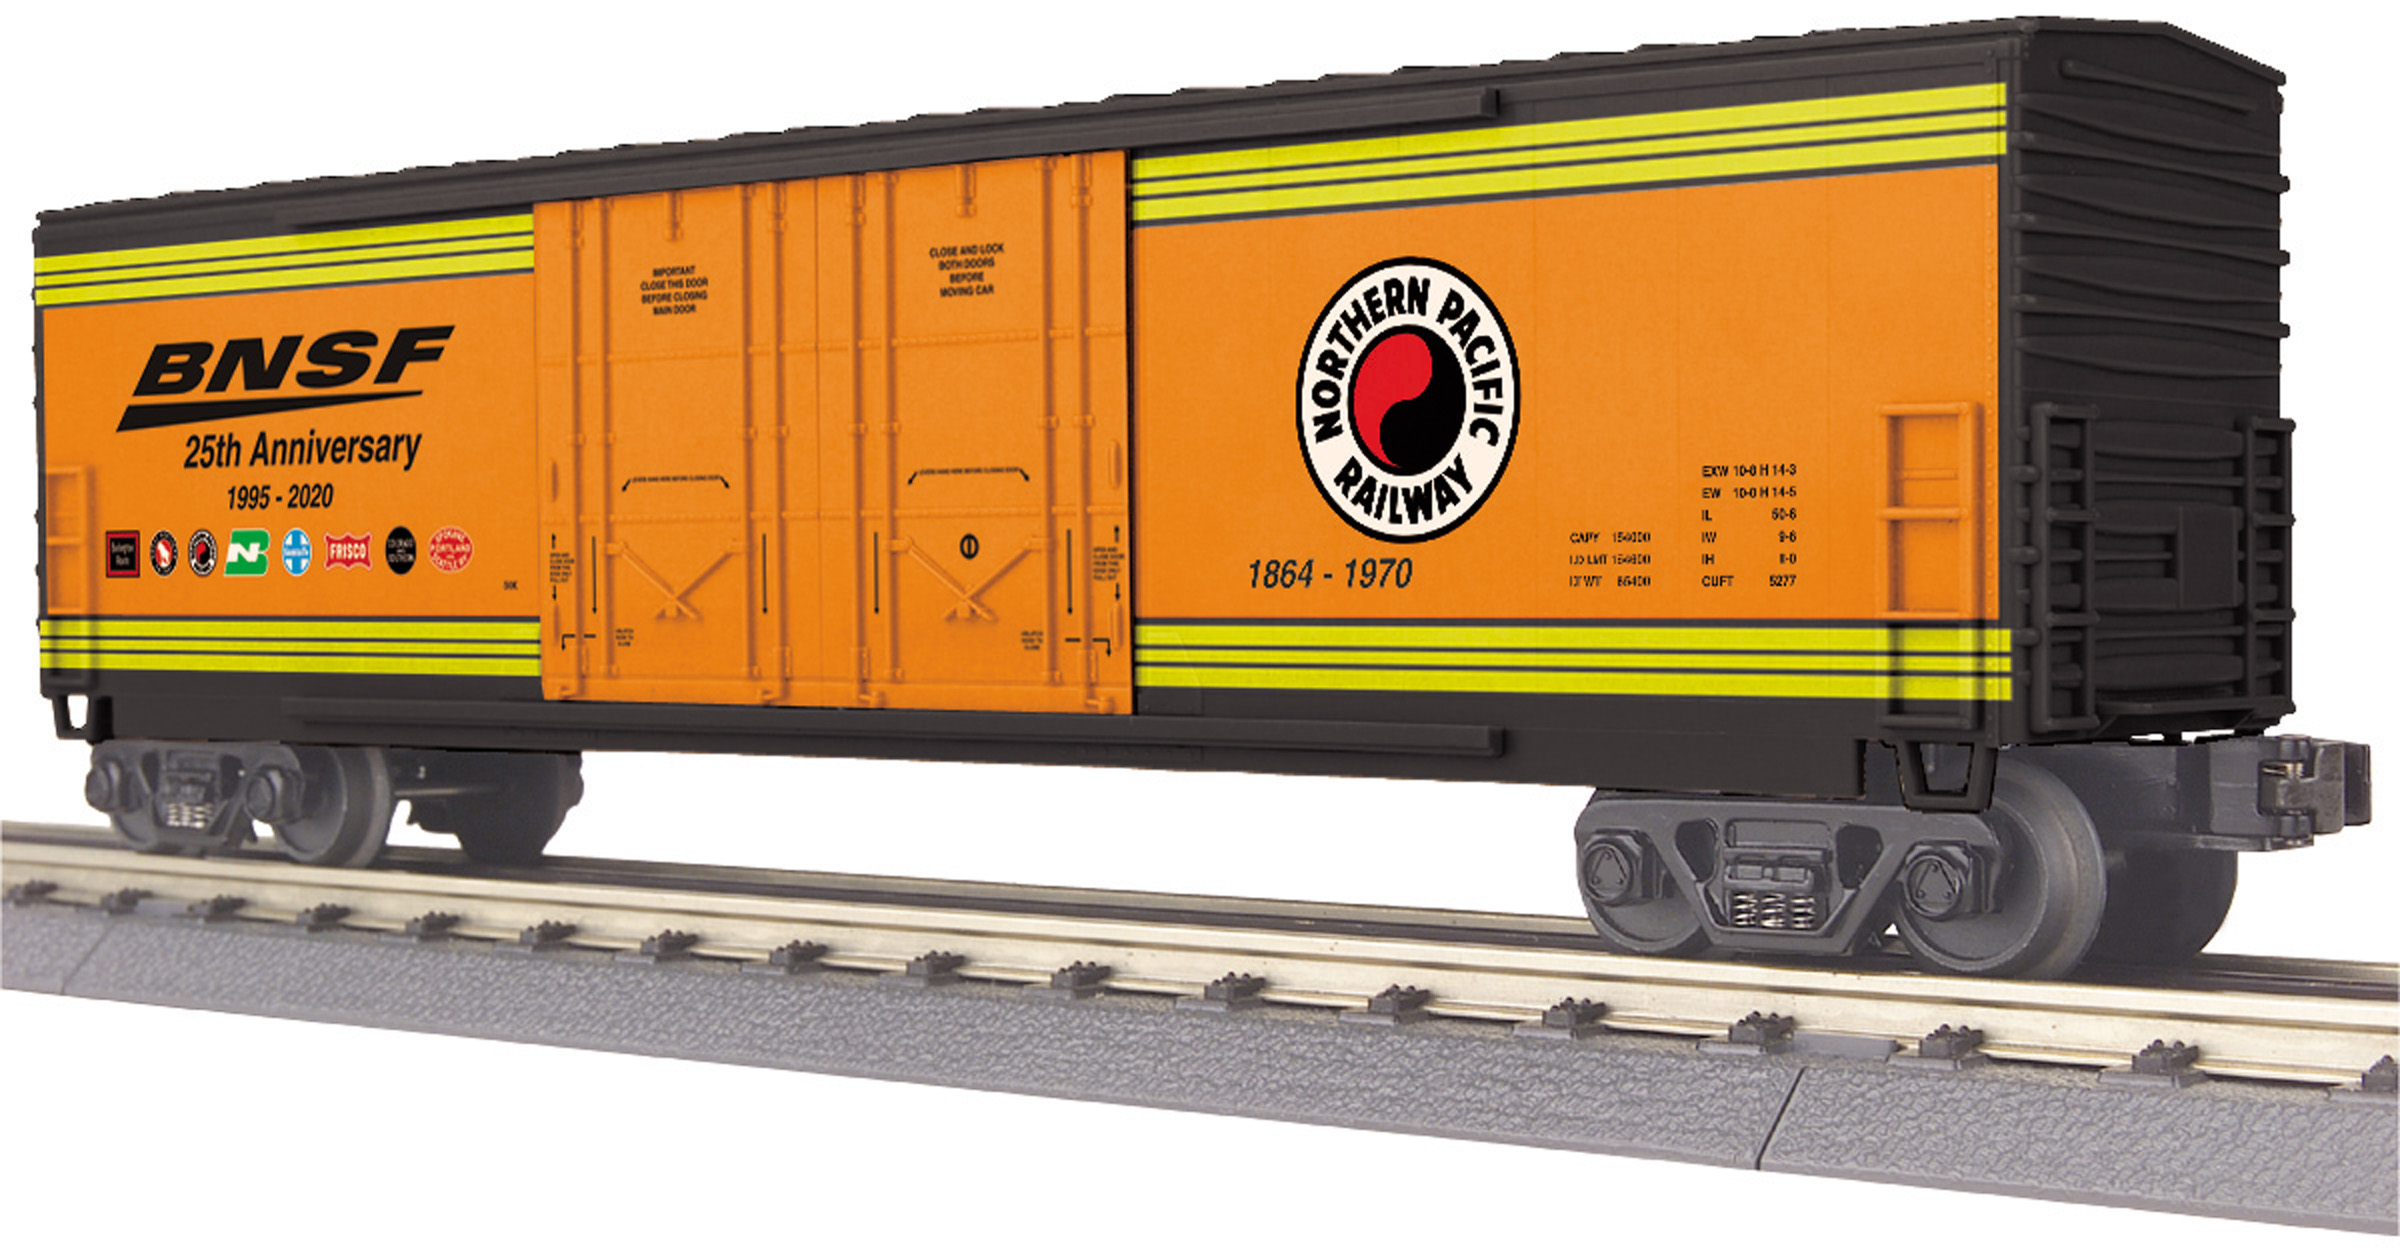 BNSF (25th Anniversary) 8-Car 50' Double Door Plugged Boxcar - Northern Pacific Railway image